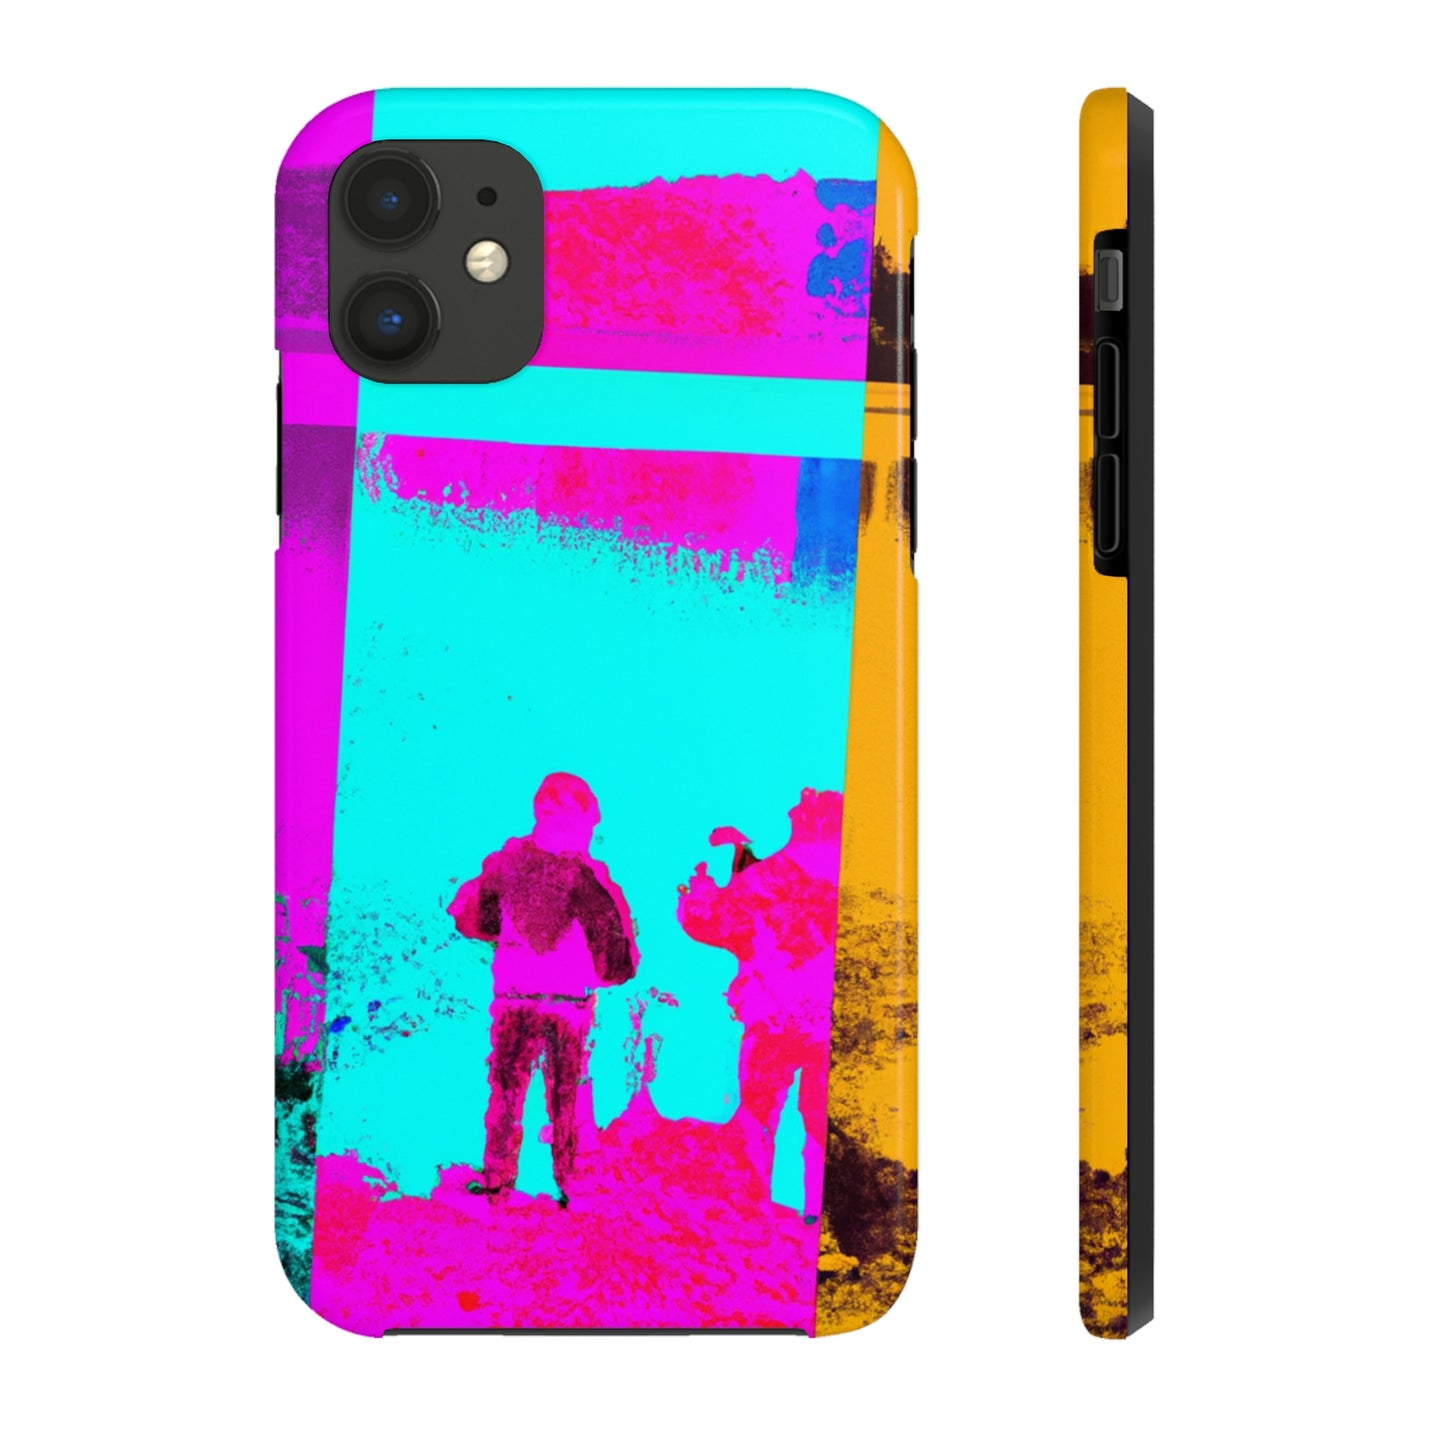 "The Lost Lake Expedition" - The Alien Tough Phone Cases